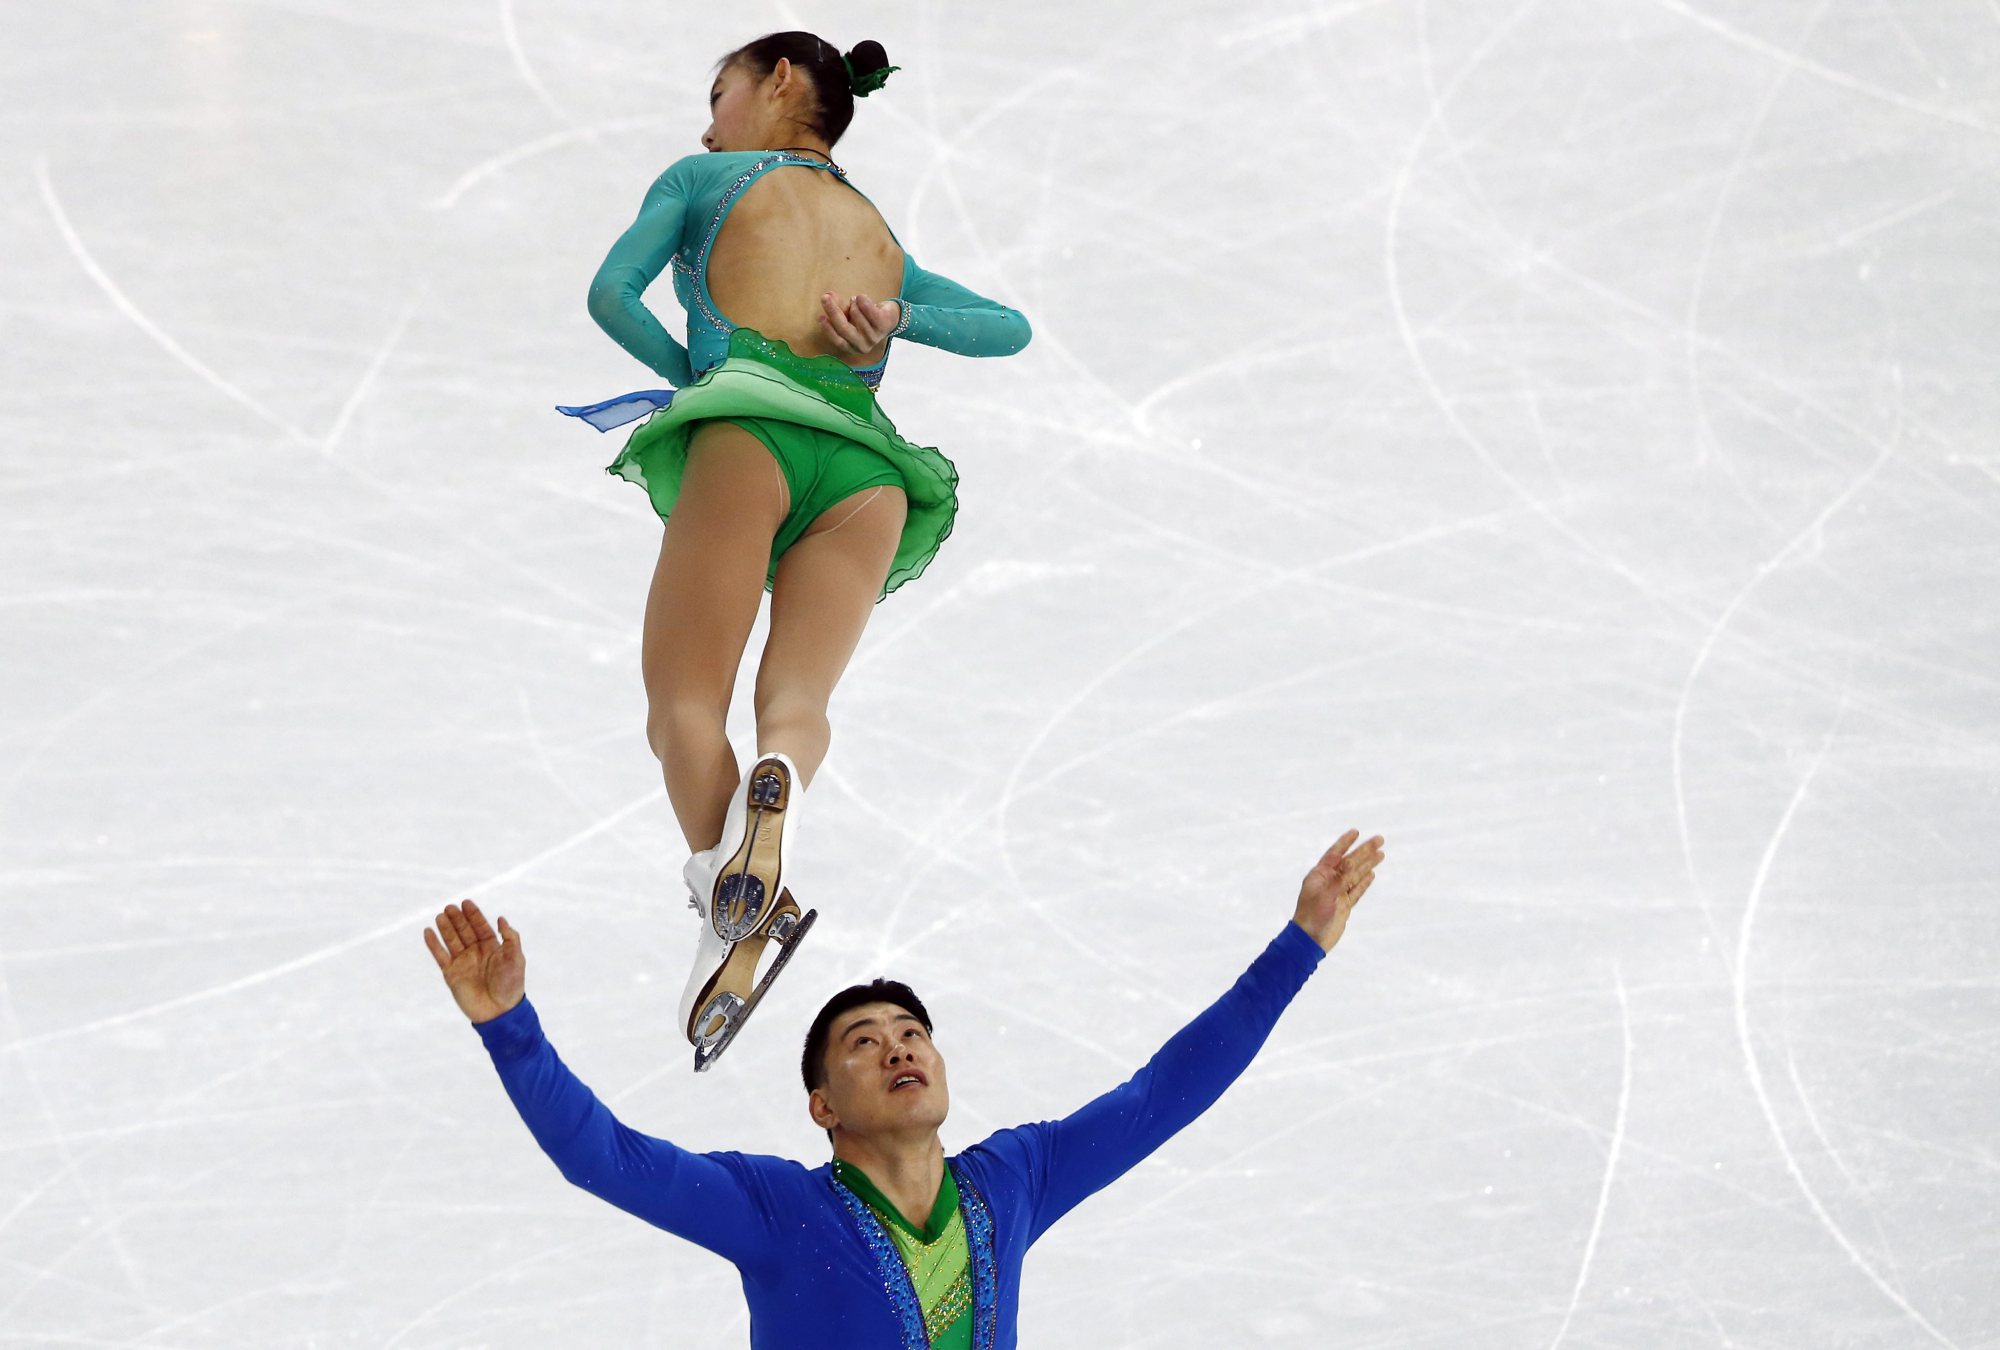 Peng Cheng and Zhang Hao of China perform in the Pairs Short Program of the Figure Skating Team event at Iceberg Skating Palace during the Sochi 2014 Olympic Games, February 6, 2014.